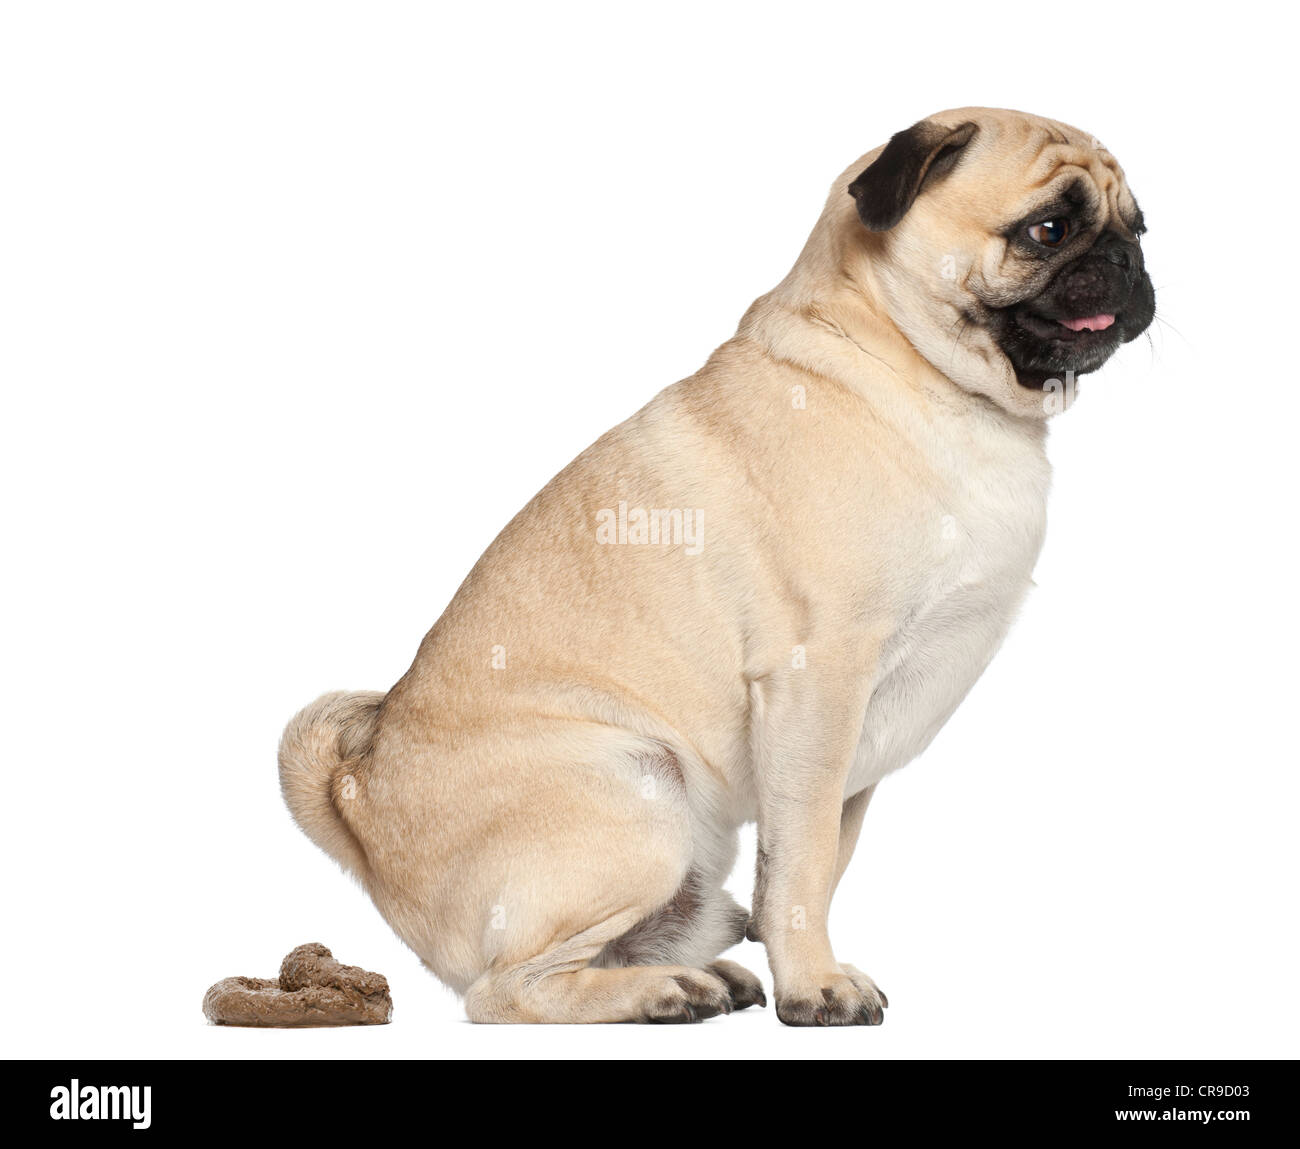 Pug, 3 years old, defecating against white background Stock Photo